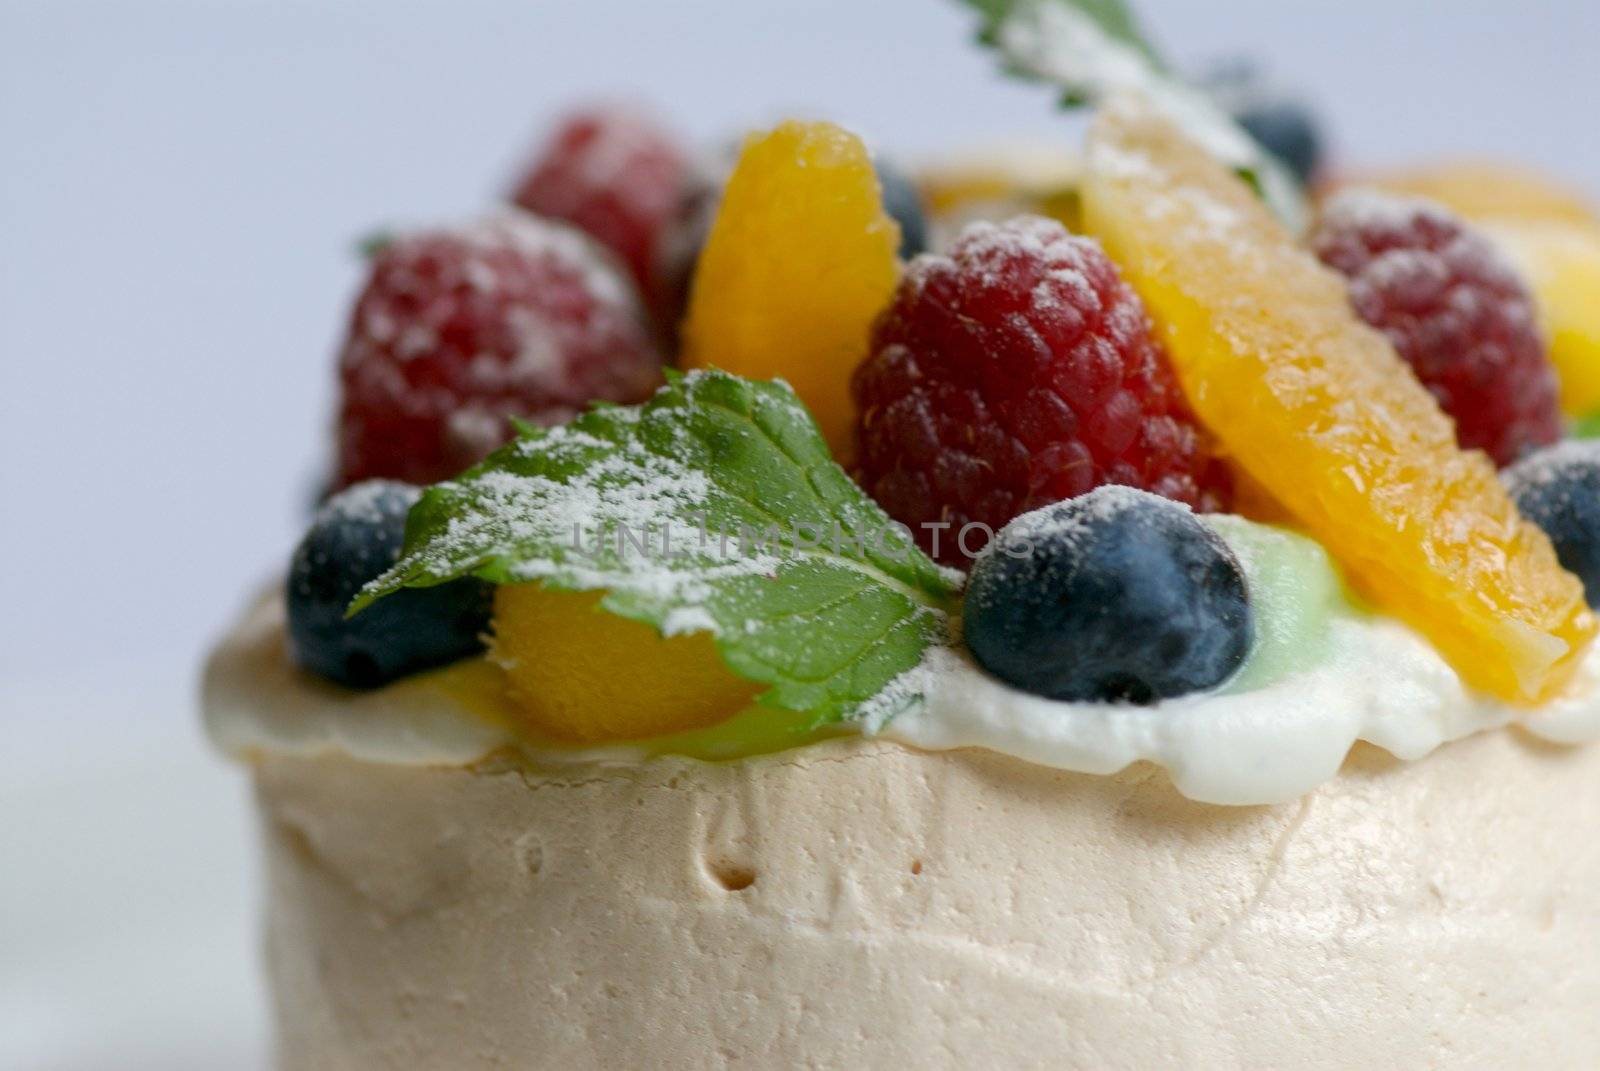 Image of merangue topped with mixed fruit